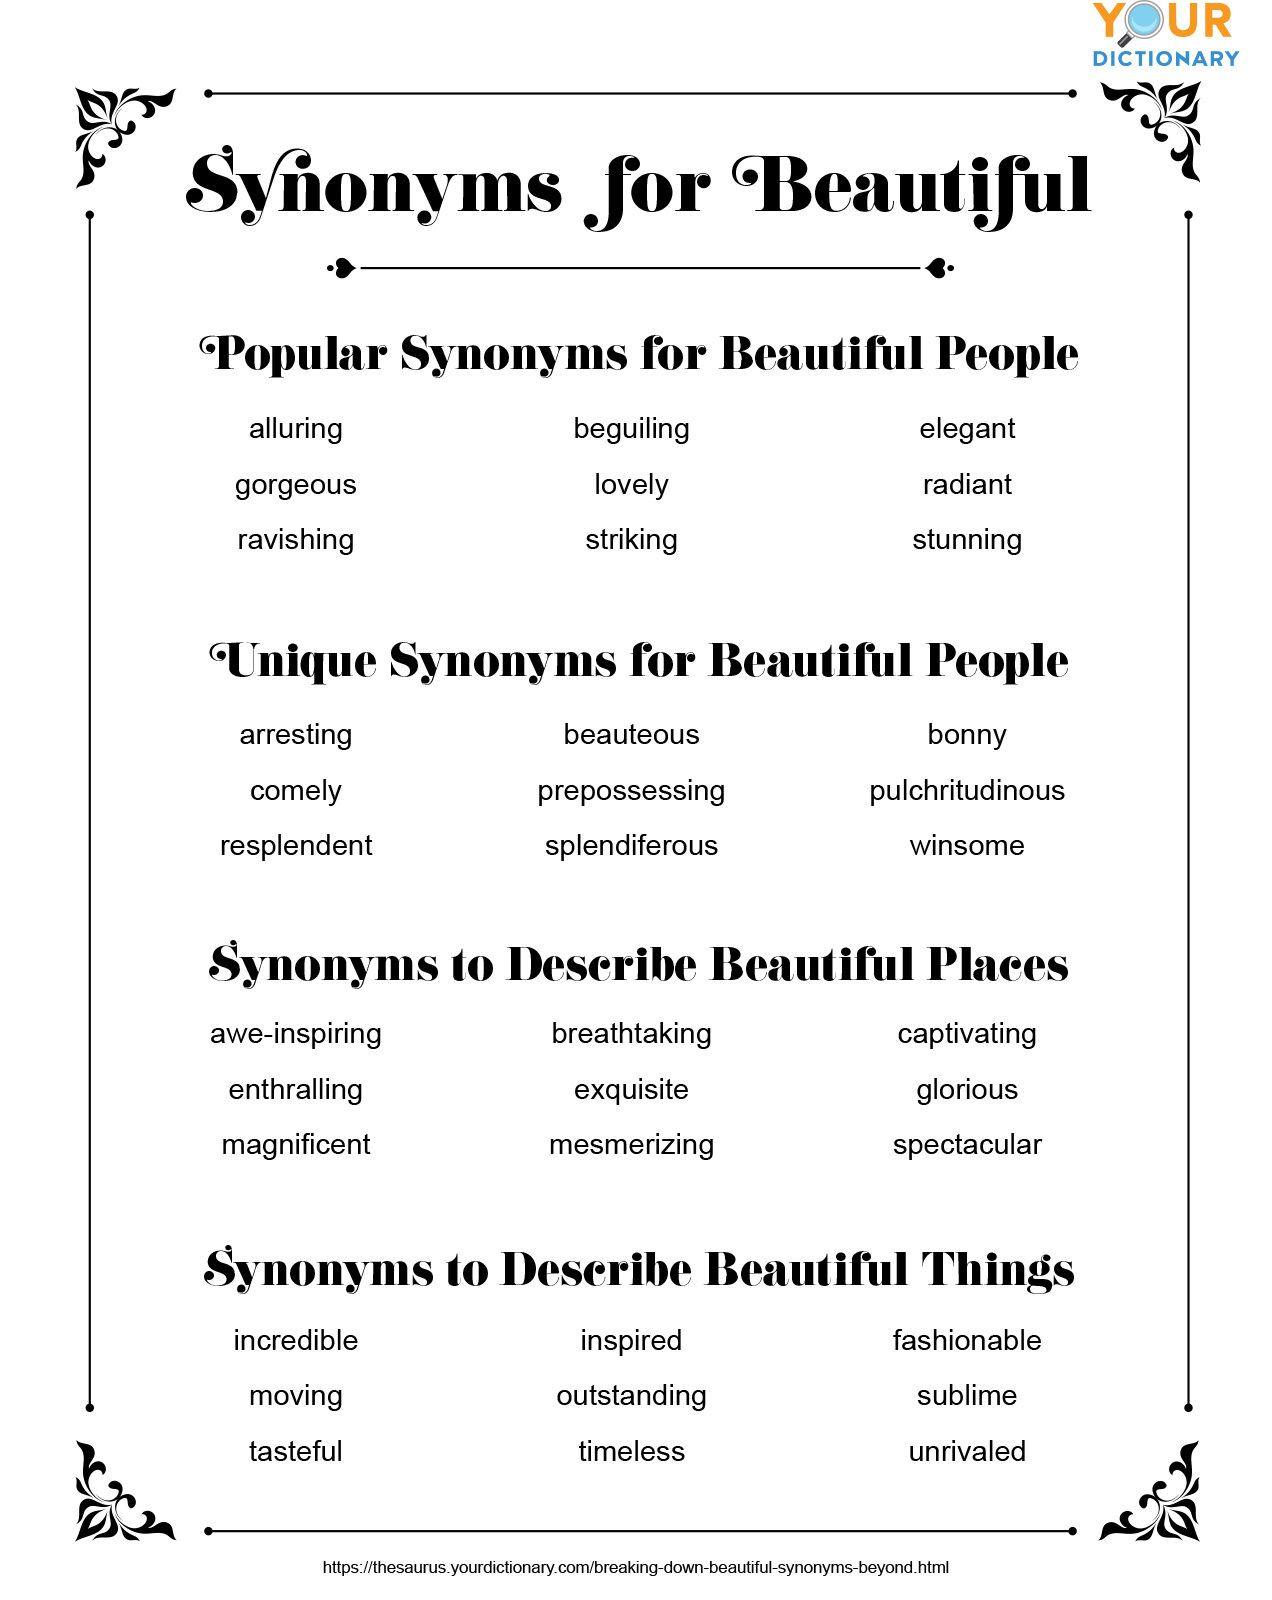 synonyms for beautiful